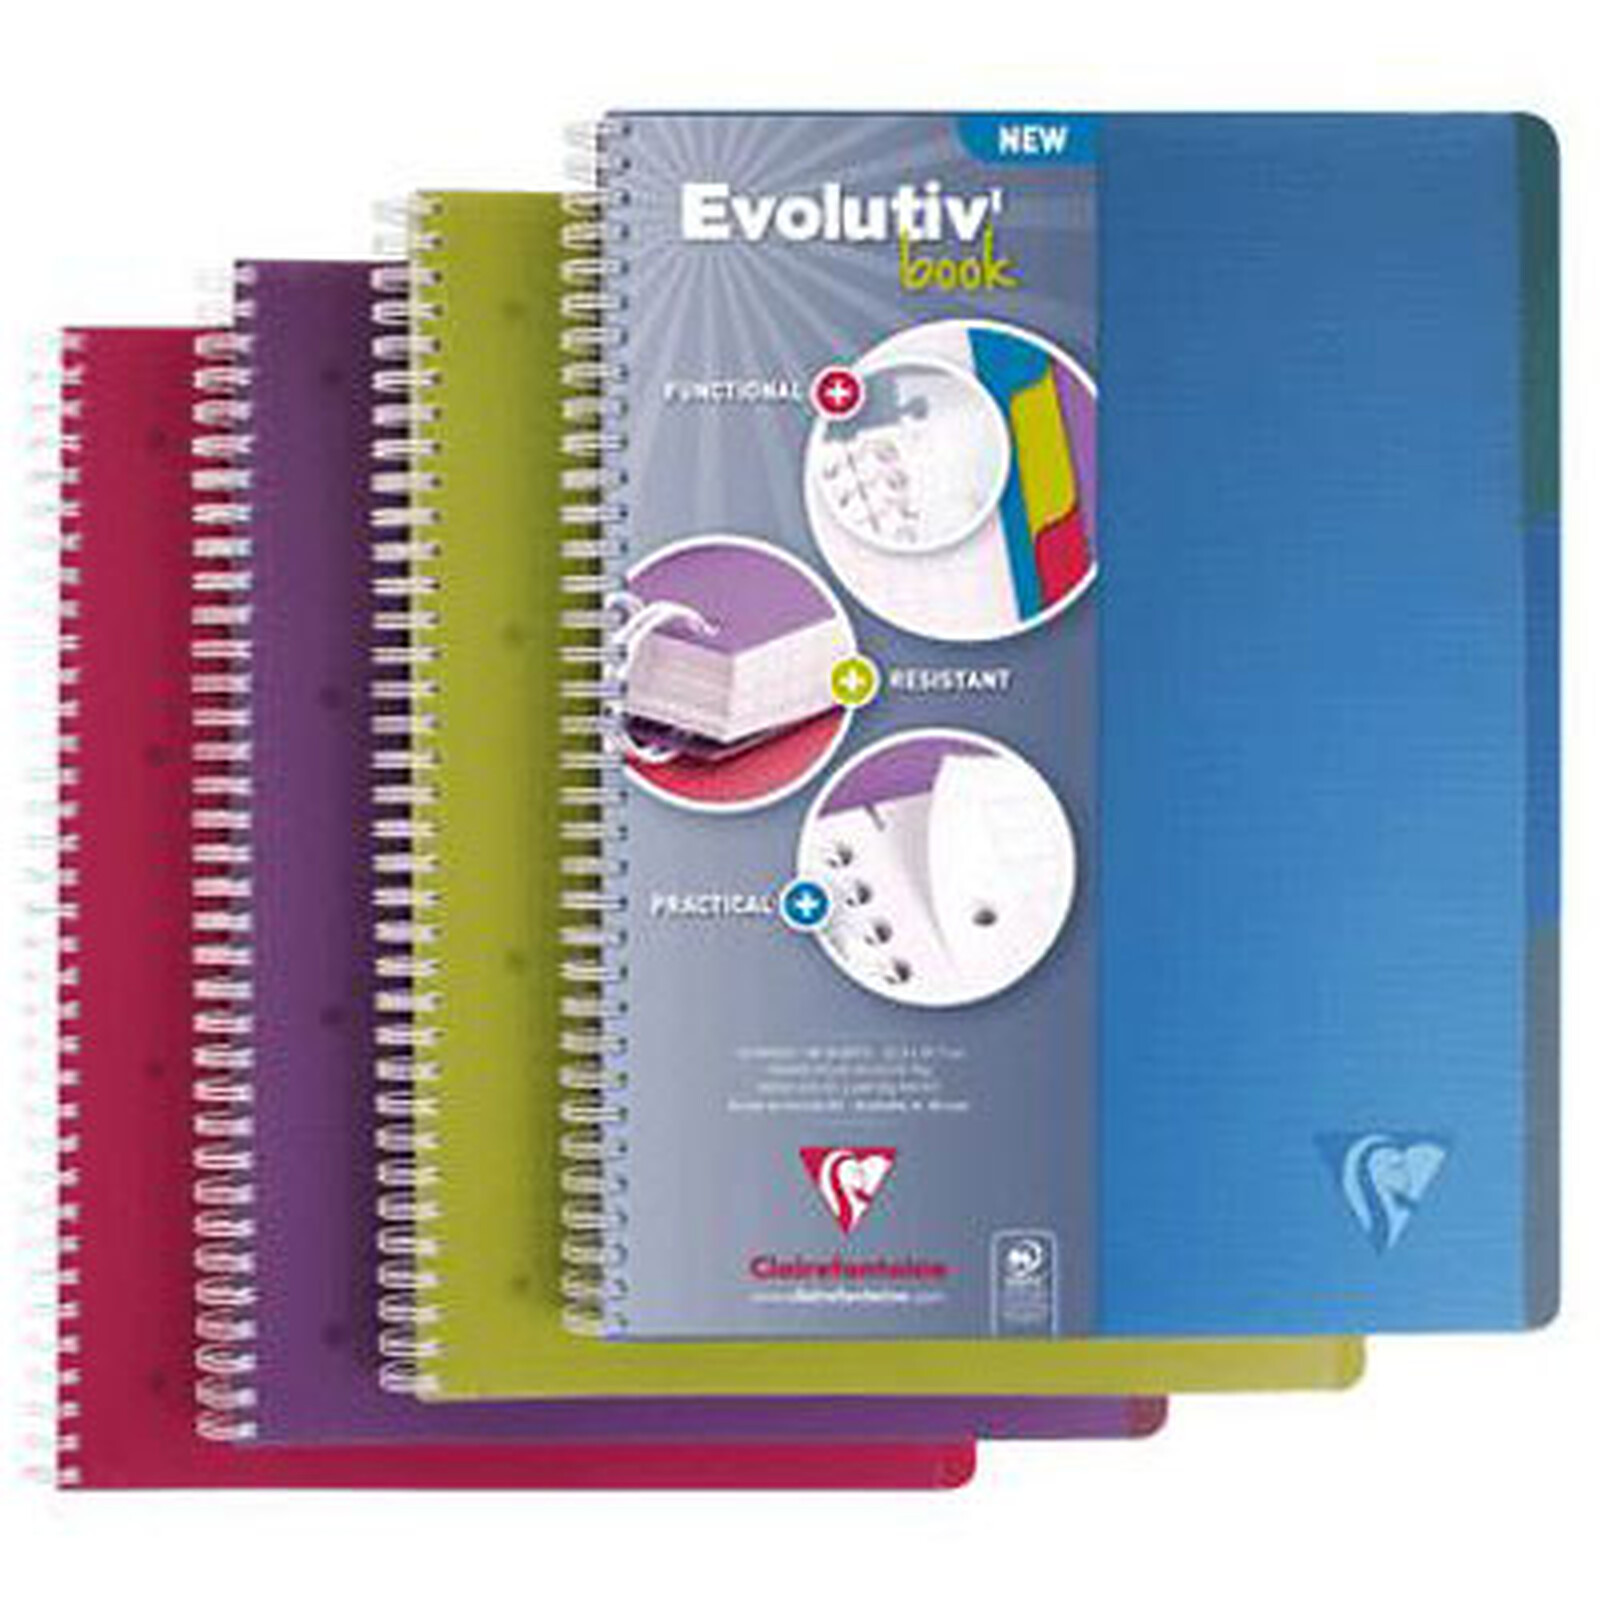 Clairefontaine Cahier Evolutiv'Book Spirale 240 pages 22.5 x 29.7